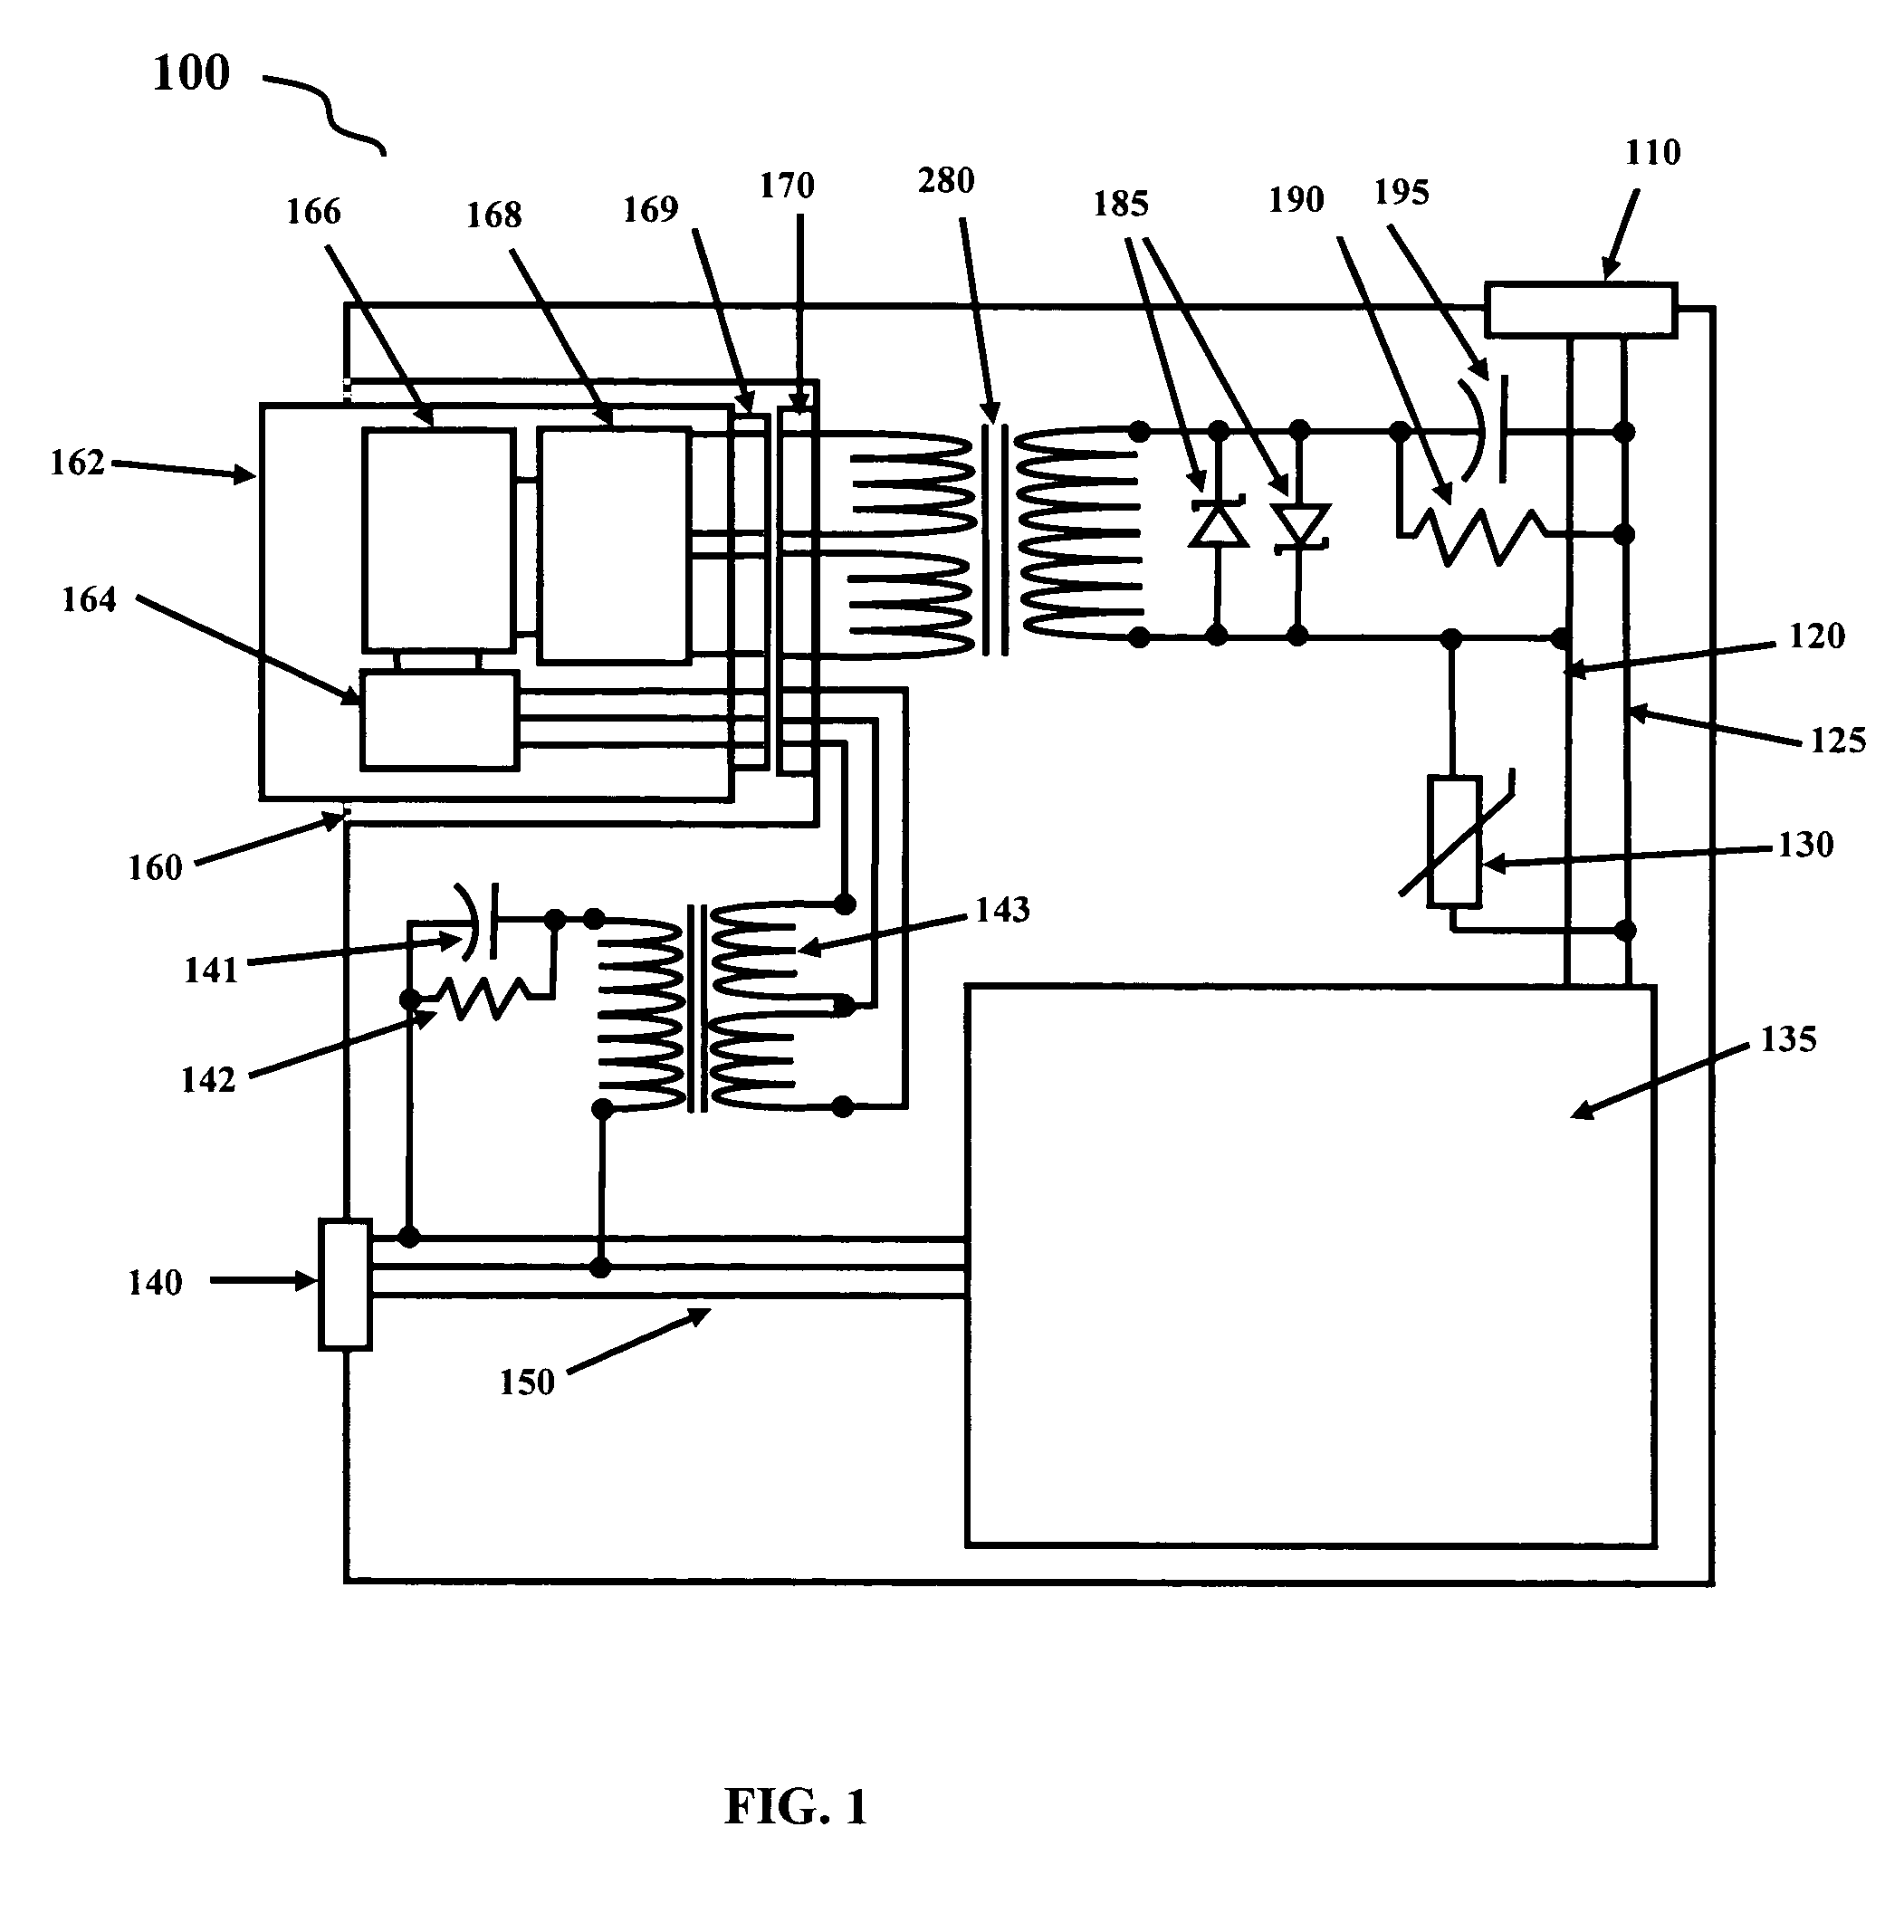 Modulated data transfer between a system and its power supply